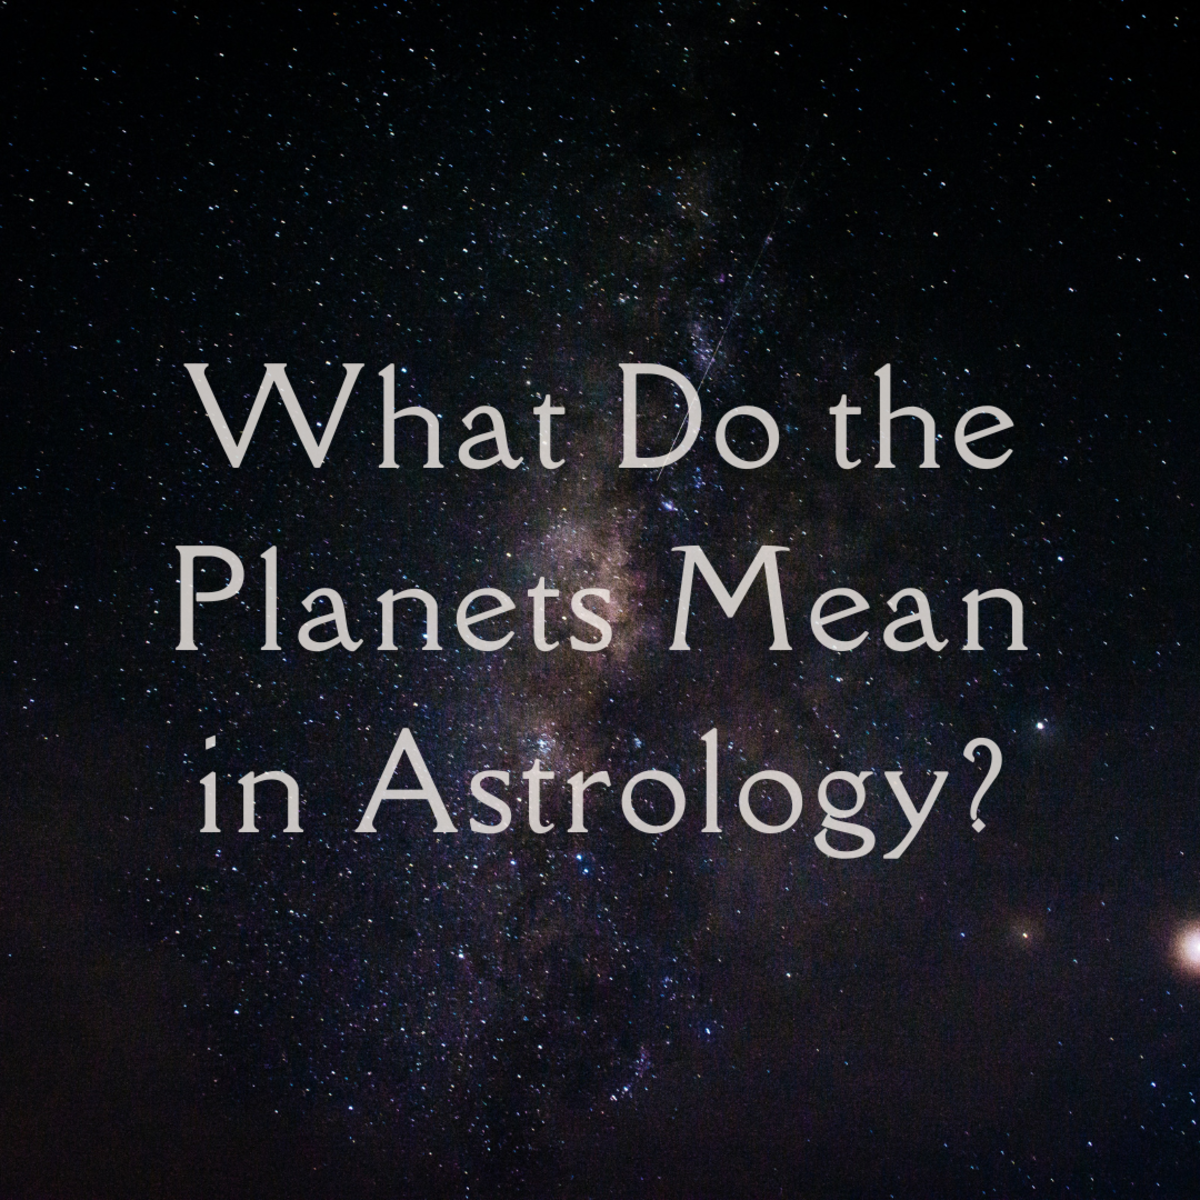 Planet Meanings in Astrology